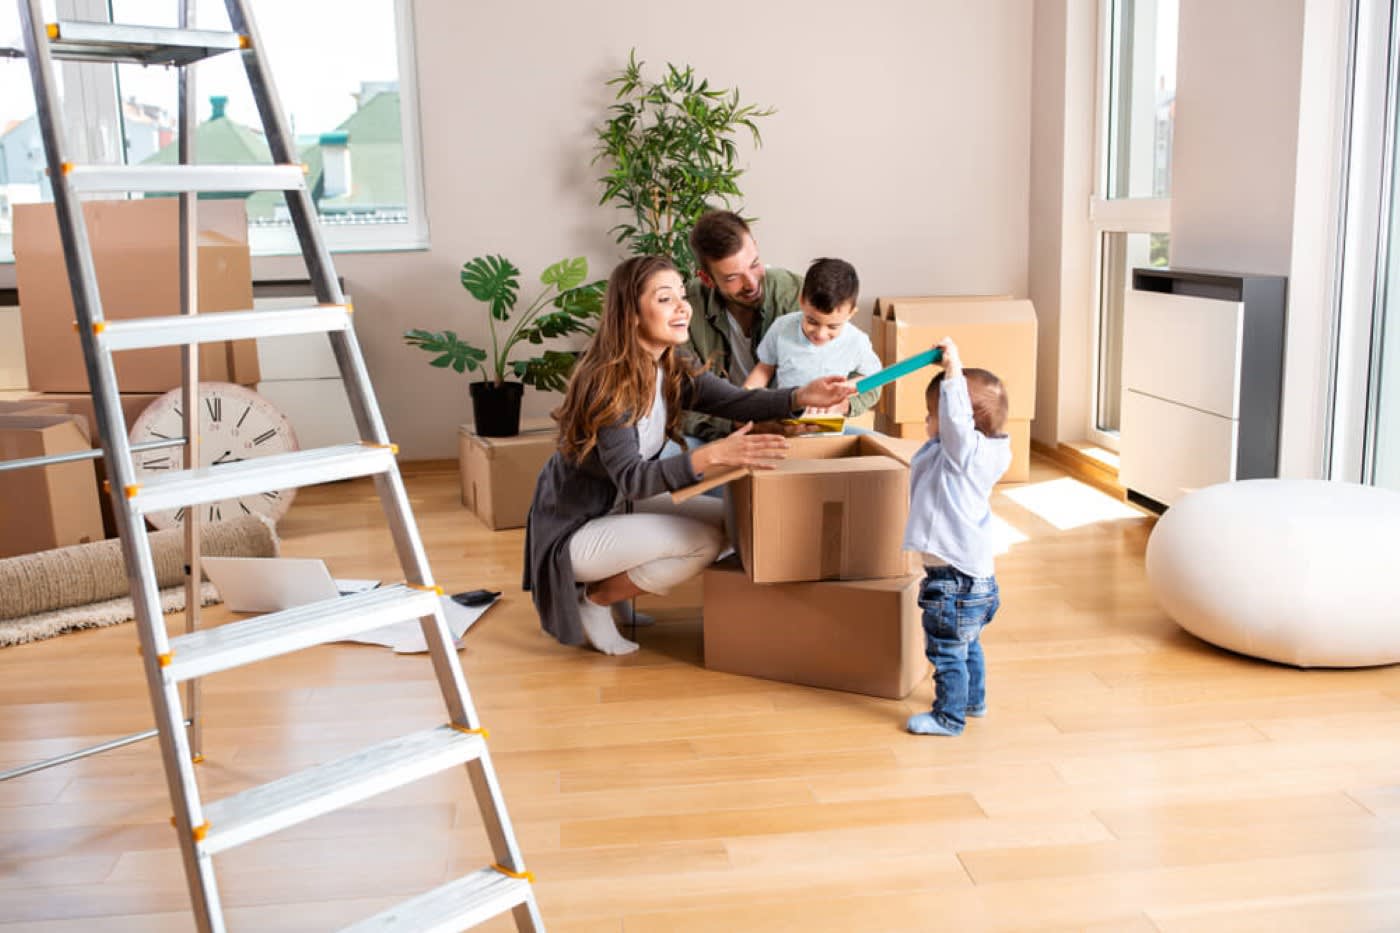 A mother and a father and two young sons are sitting in the middle of the room around packing boxes after moving into a new home. They are in the middle of unpacking the boxes together. There are some plants behind them as well as more boxes. In the foreground of the photo is a tall ladder.